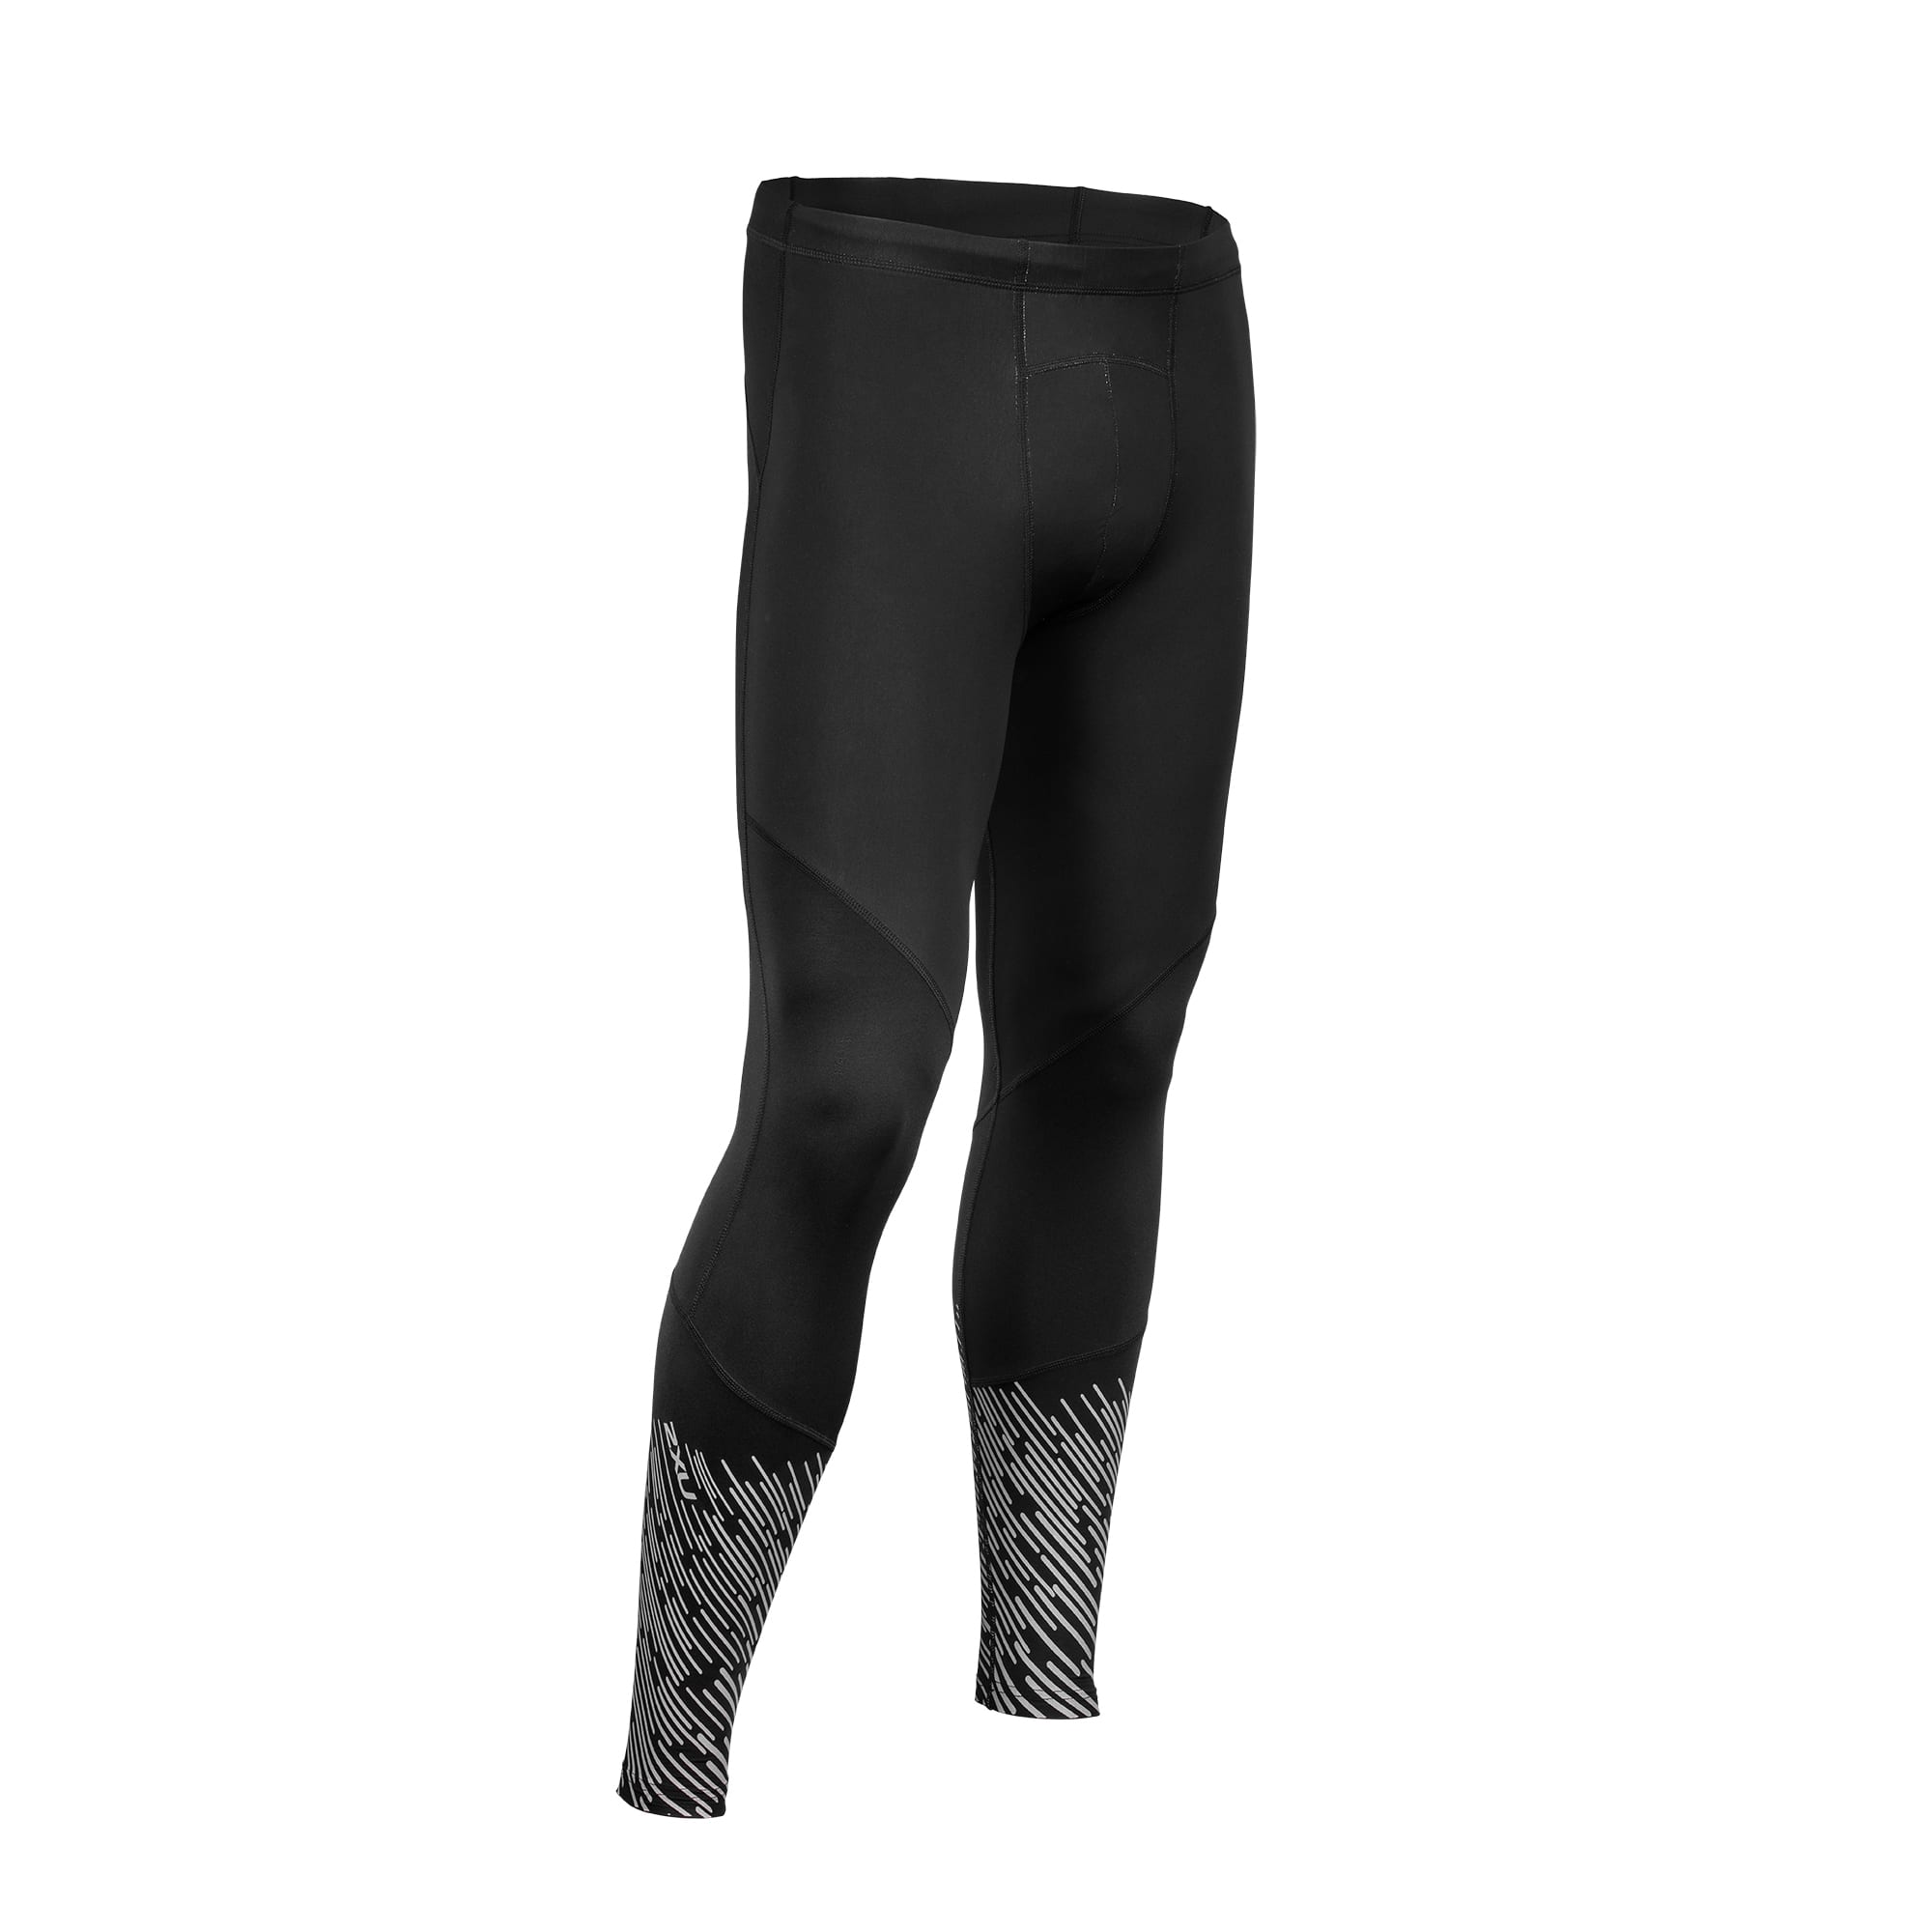 2XU Wind Defence Compression Tights